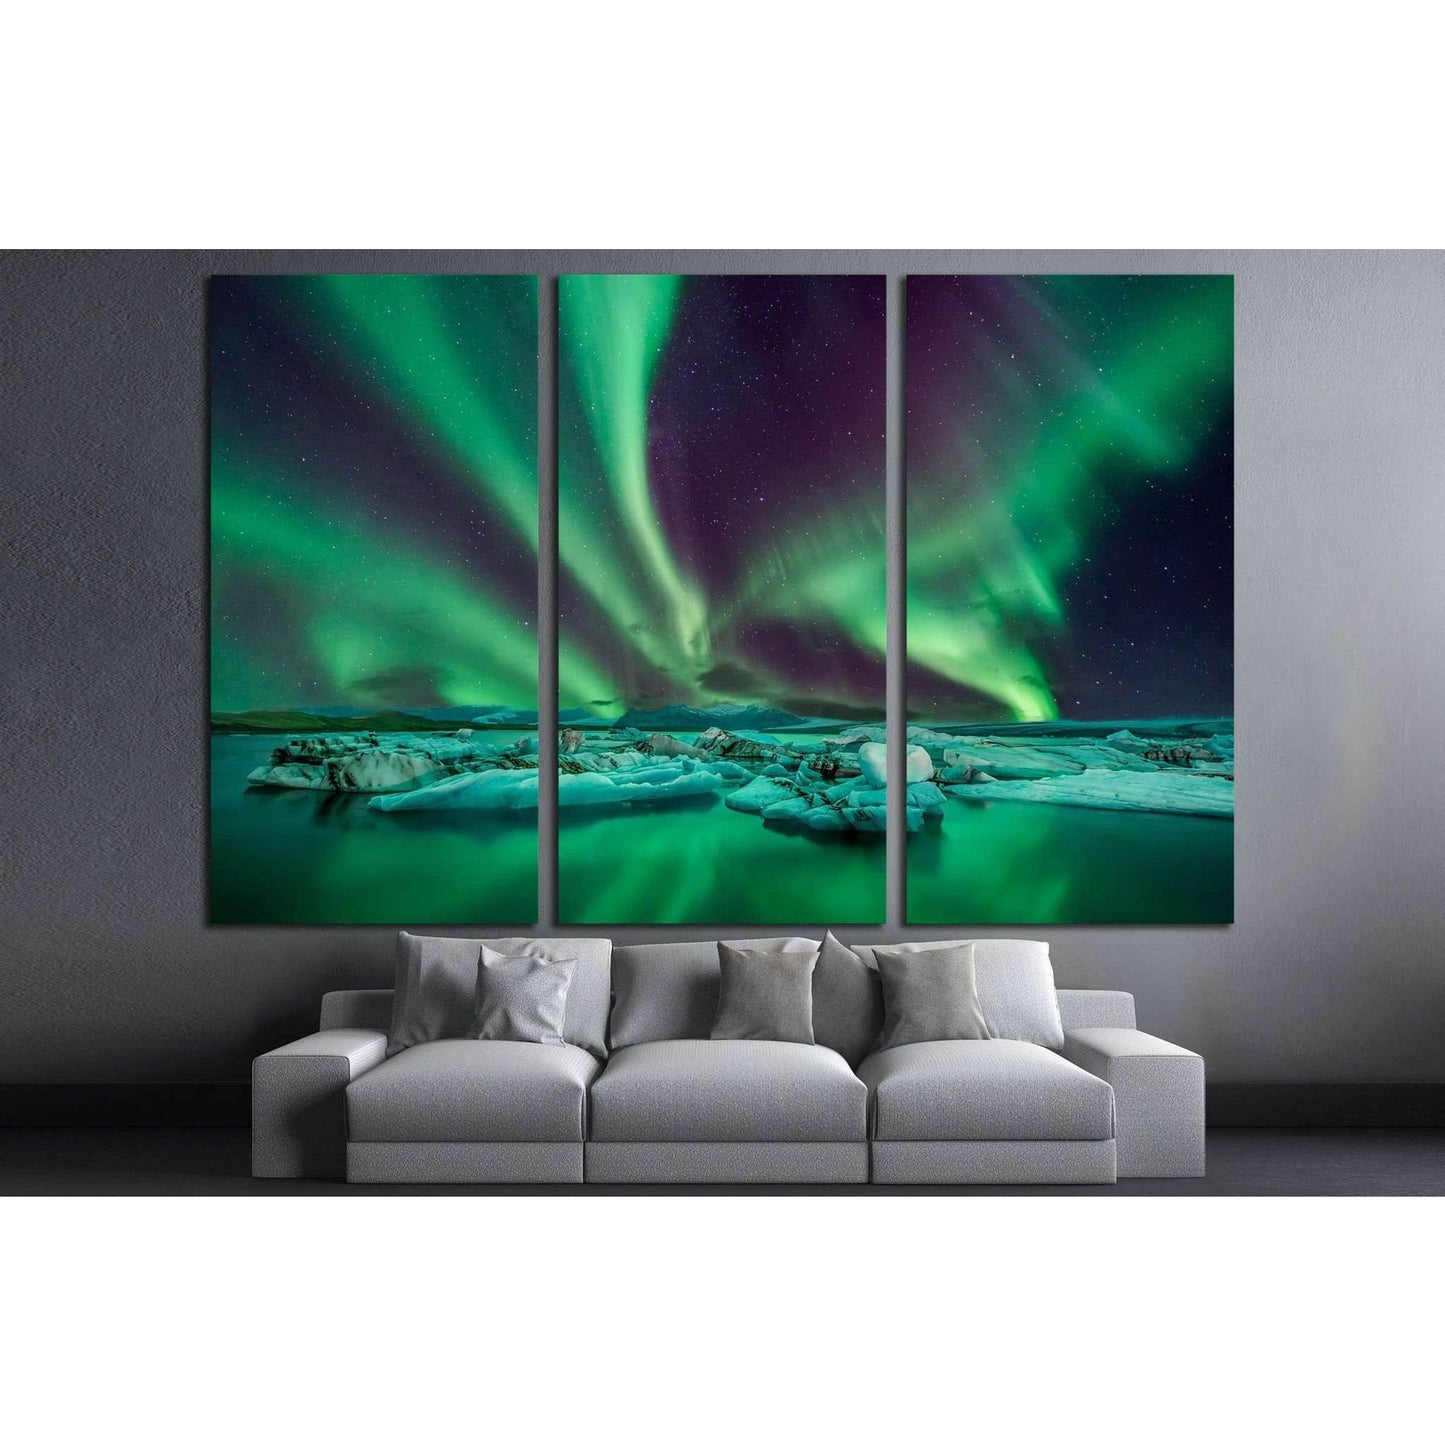 Northern Lights Over Icy Landscape Canvas Print for Modern Home DecorThis canvas print showcases the magnificent Northern Lights, or Aurora Borealis, with their ethereal green hues dancing over a serene icy landscape. It's a piece that would bring a sense